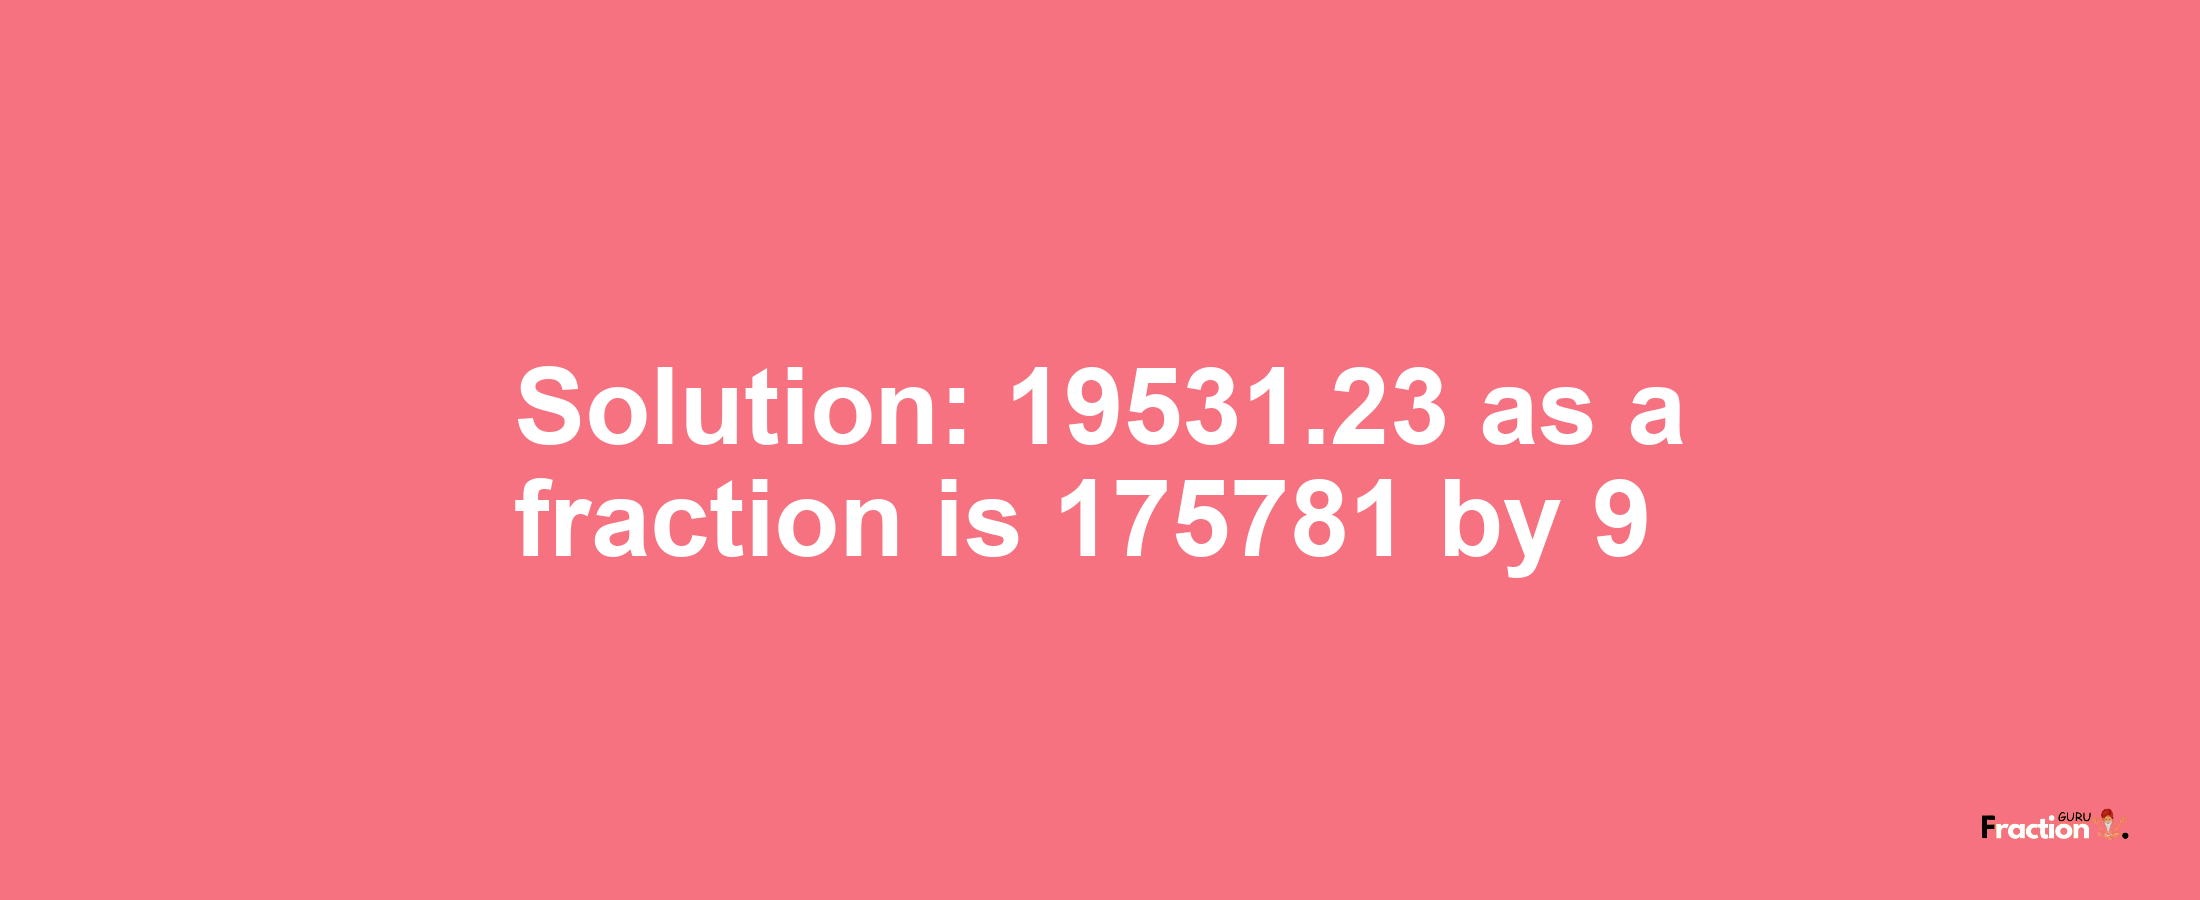 Solution:19531.23 as a fraction is 175781/9